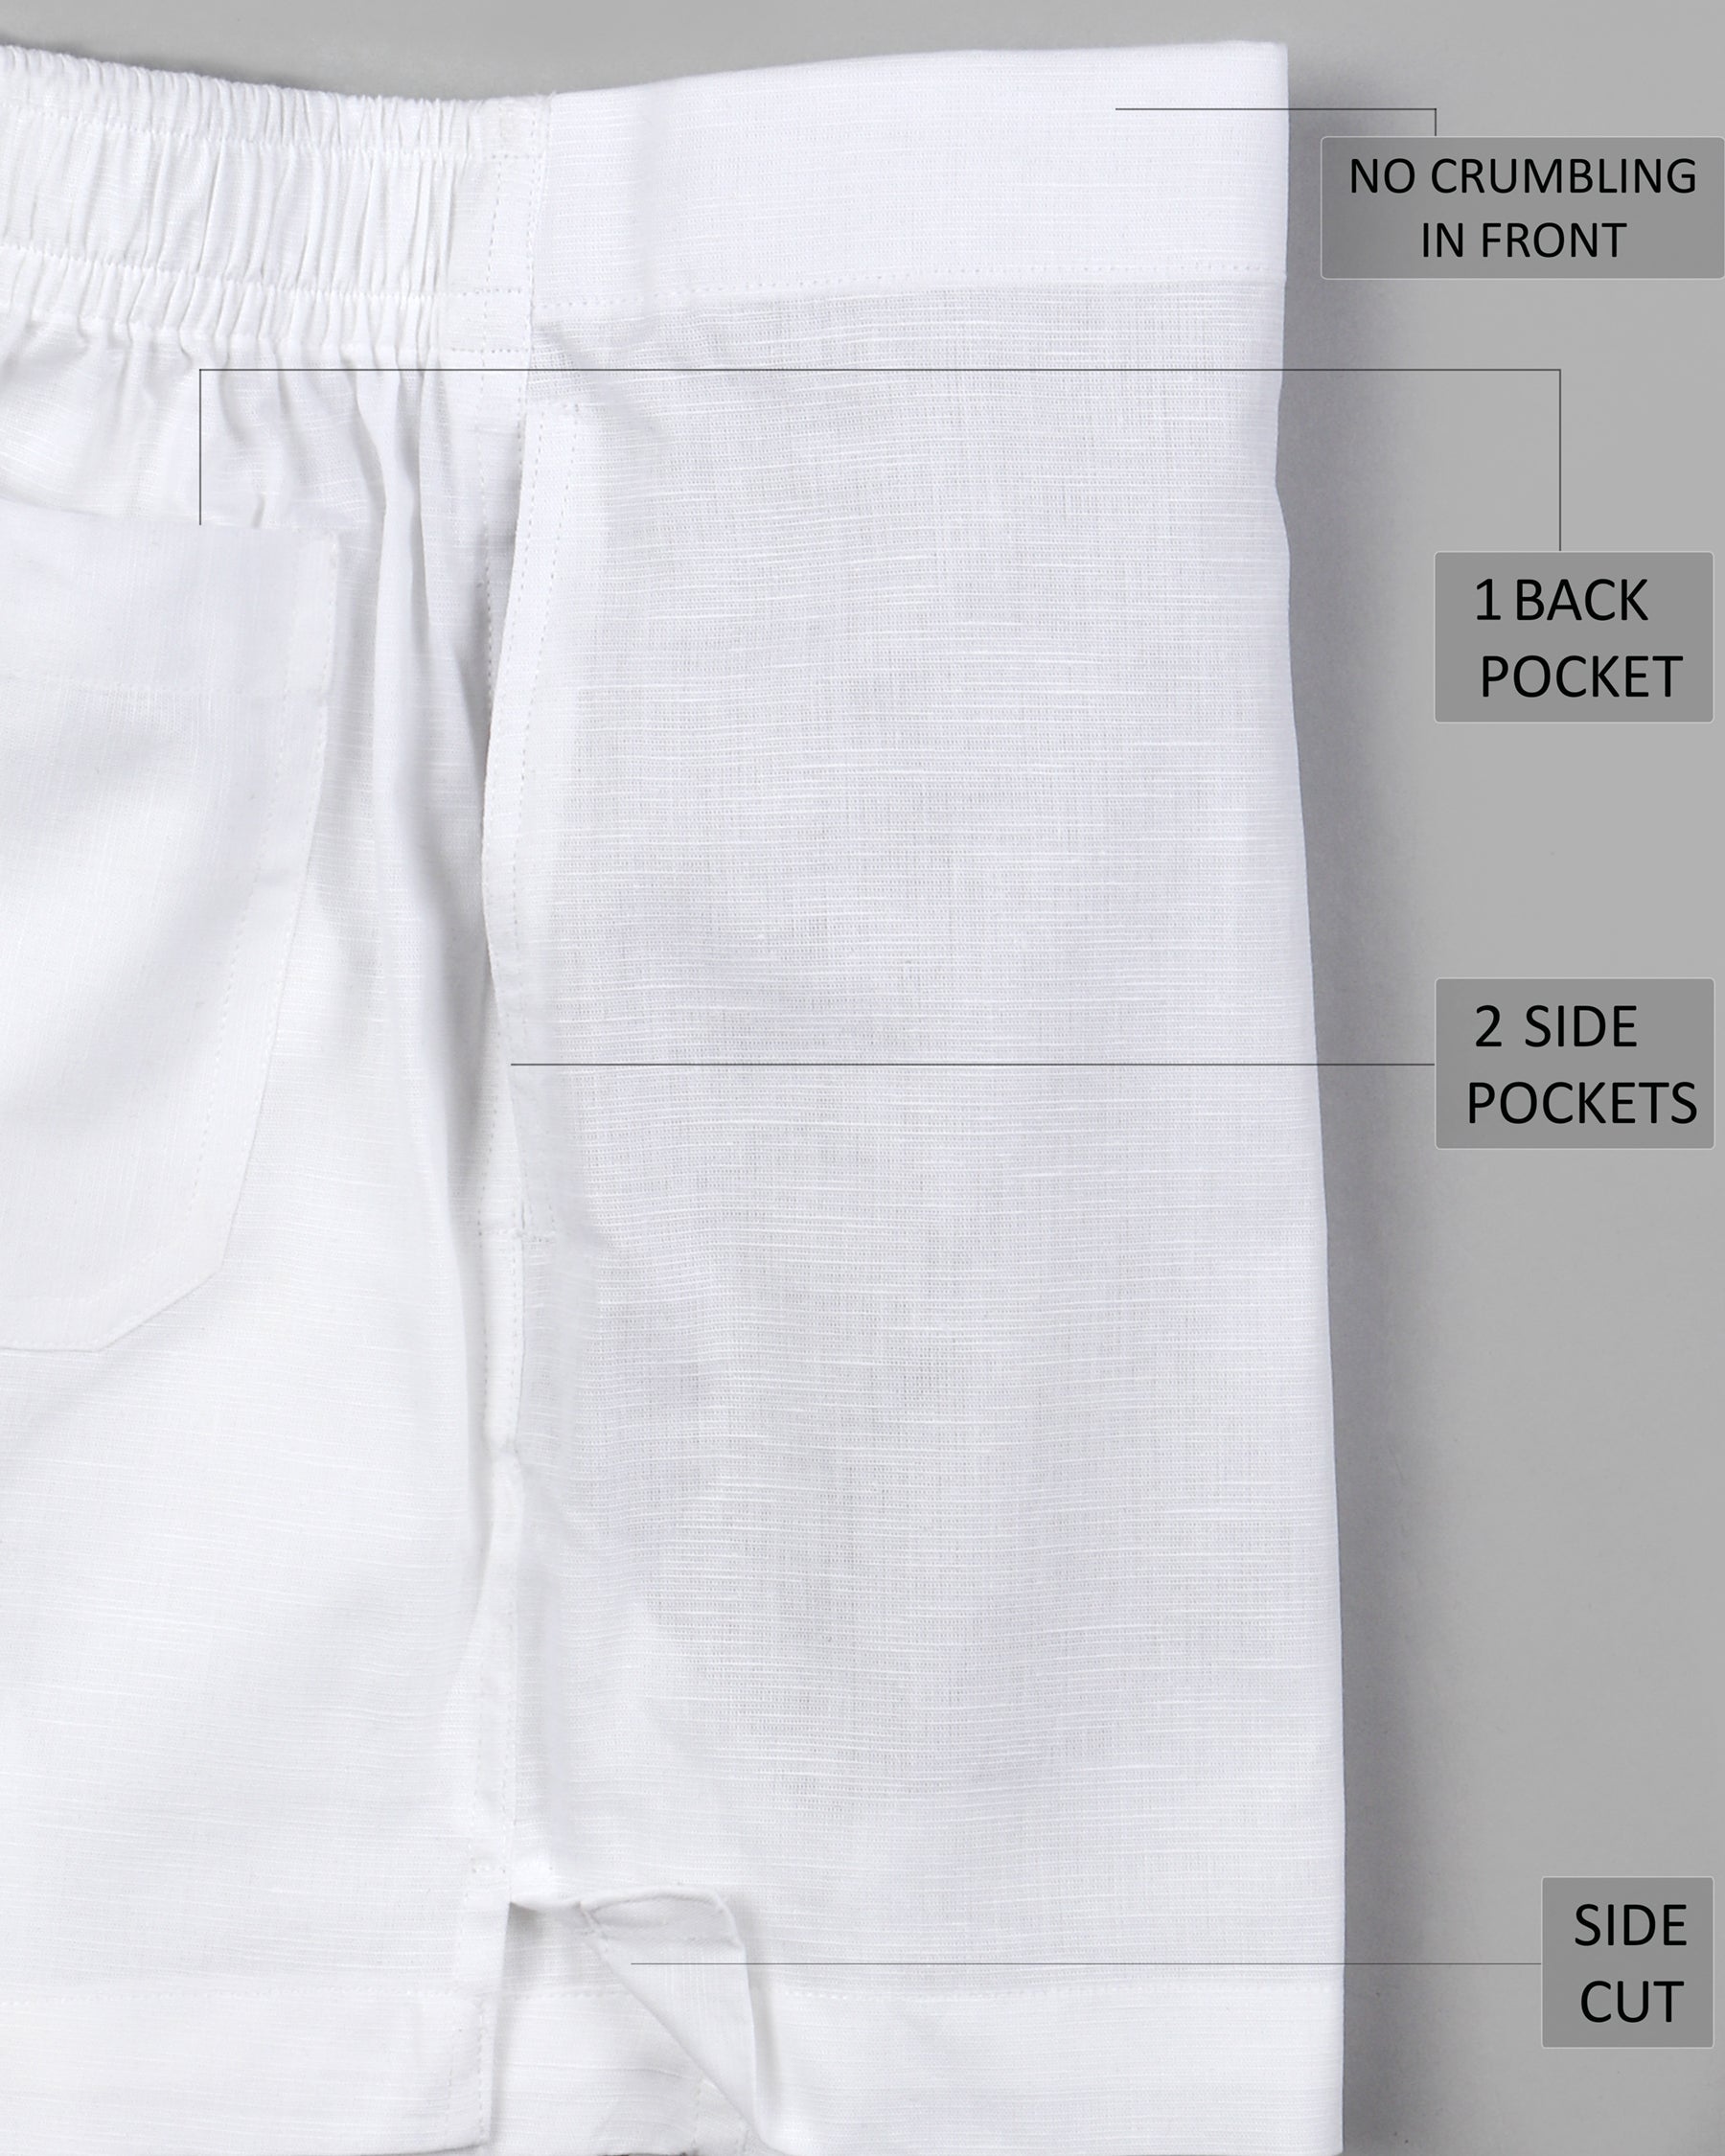 Two Pack Boxers in White, Underwear